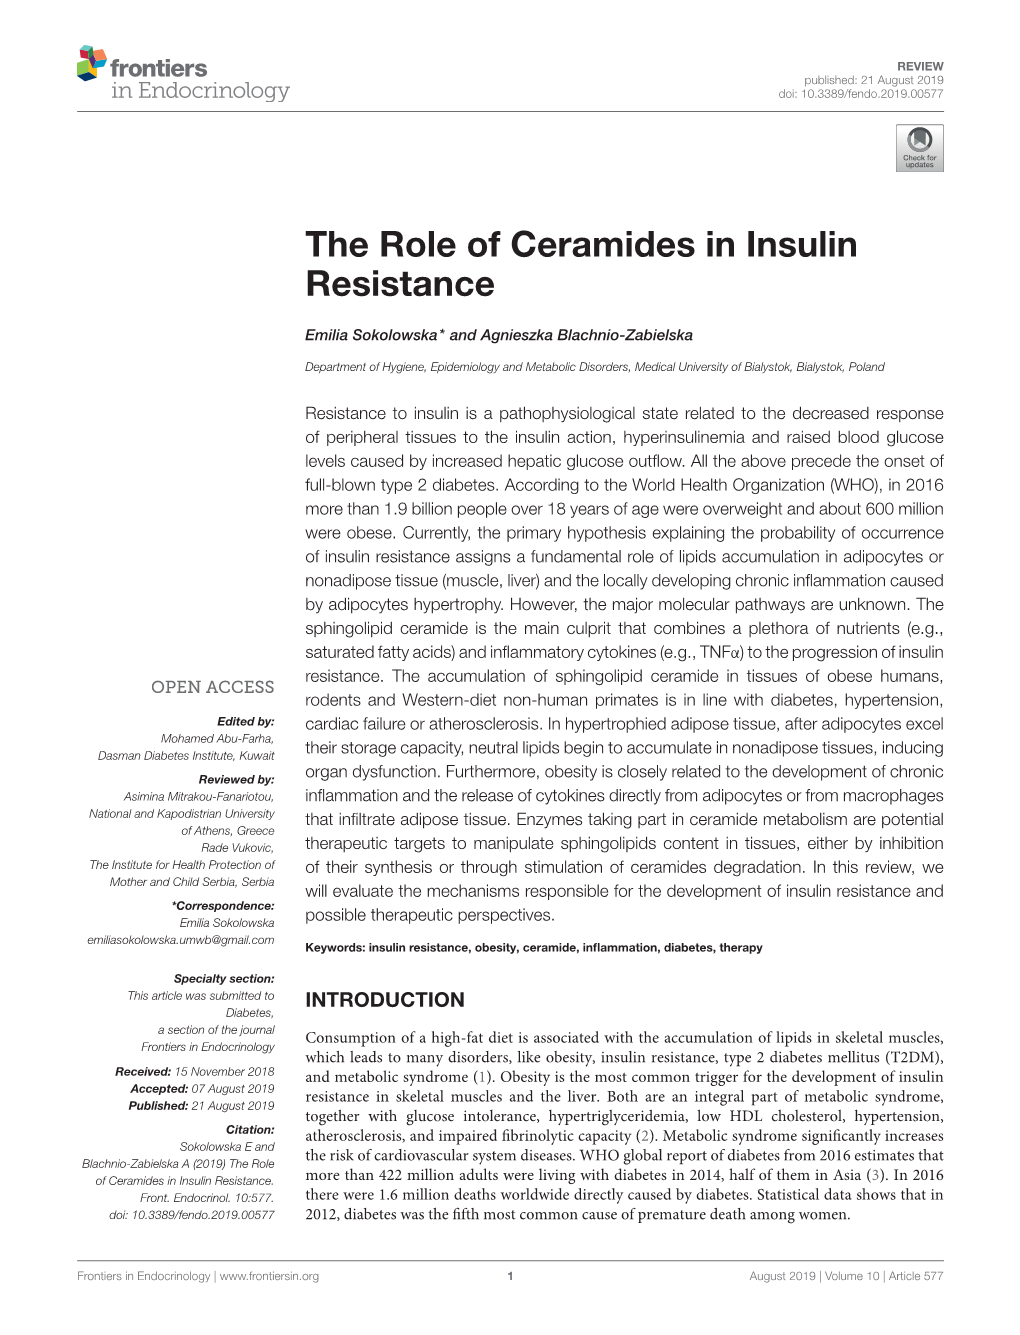 The Role of Ceramides in Insulin Resistance